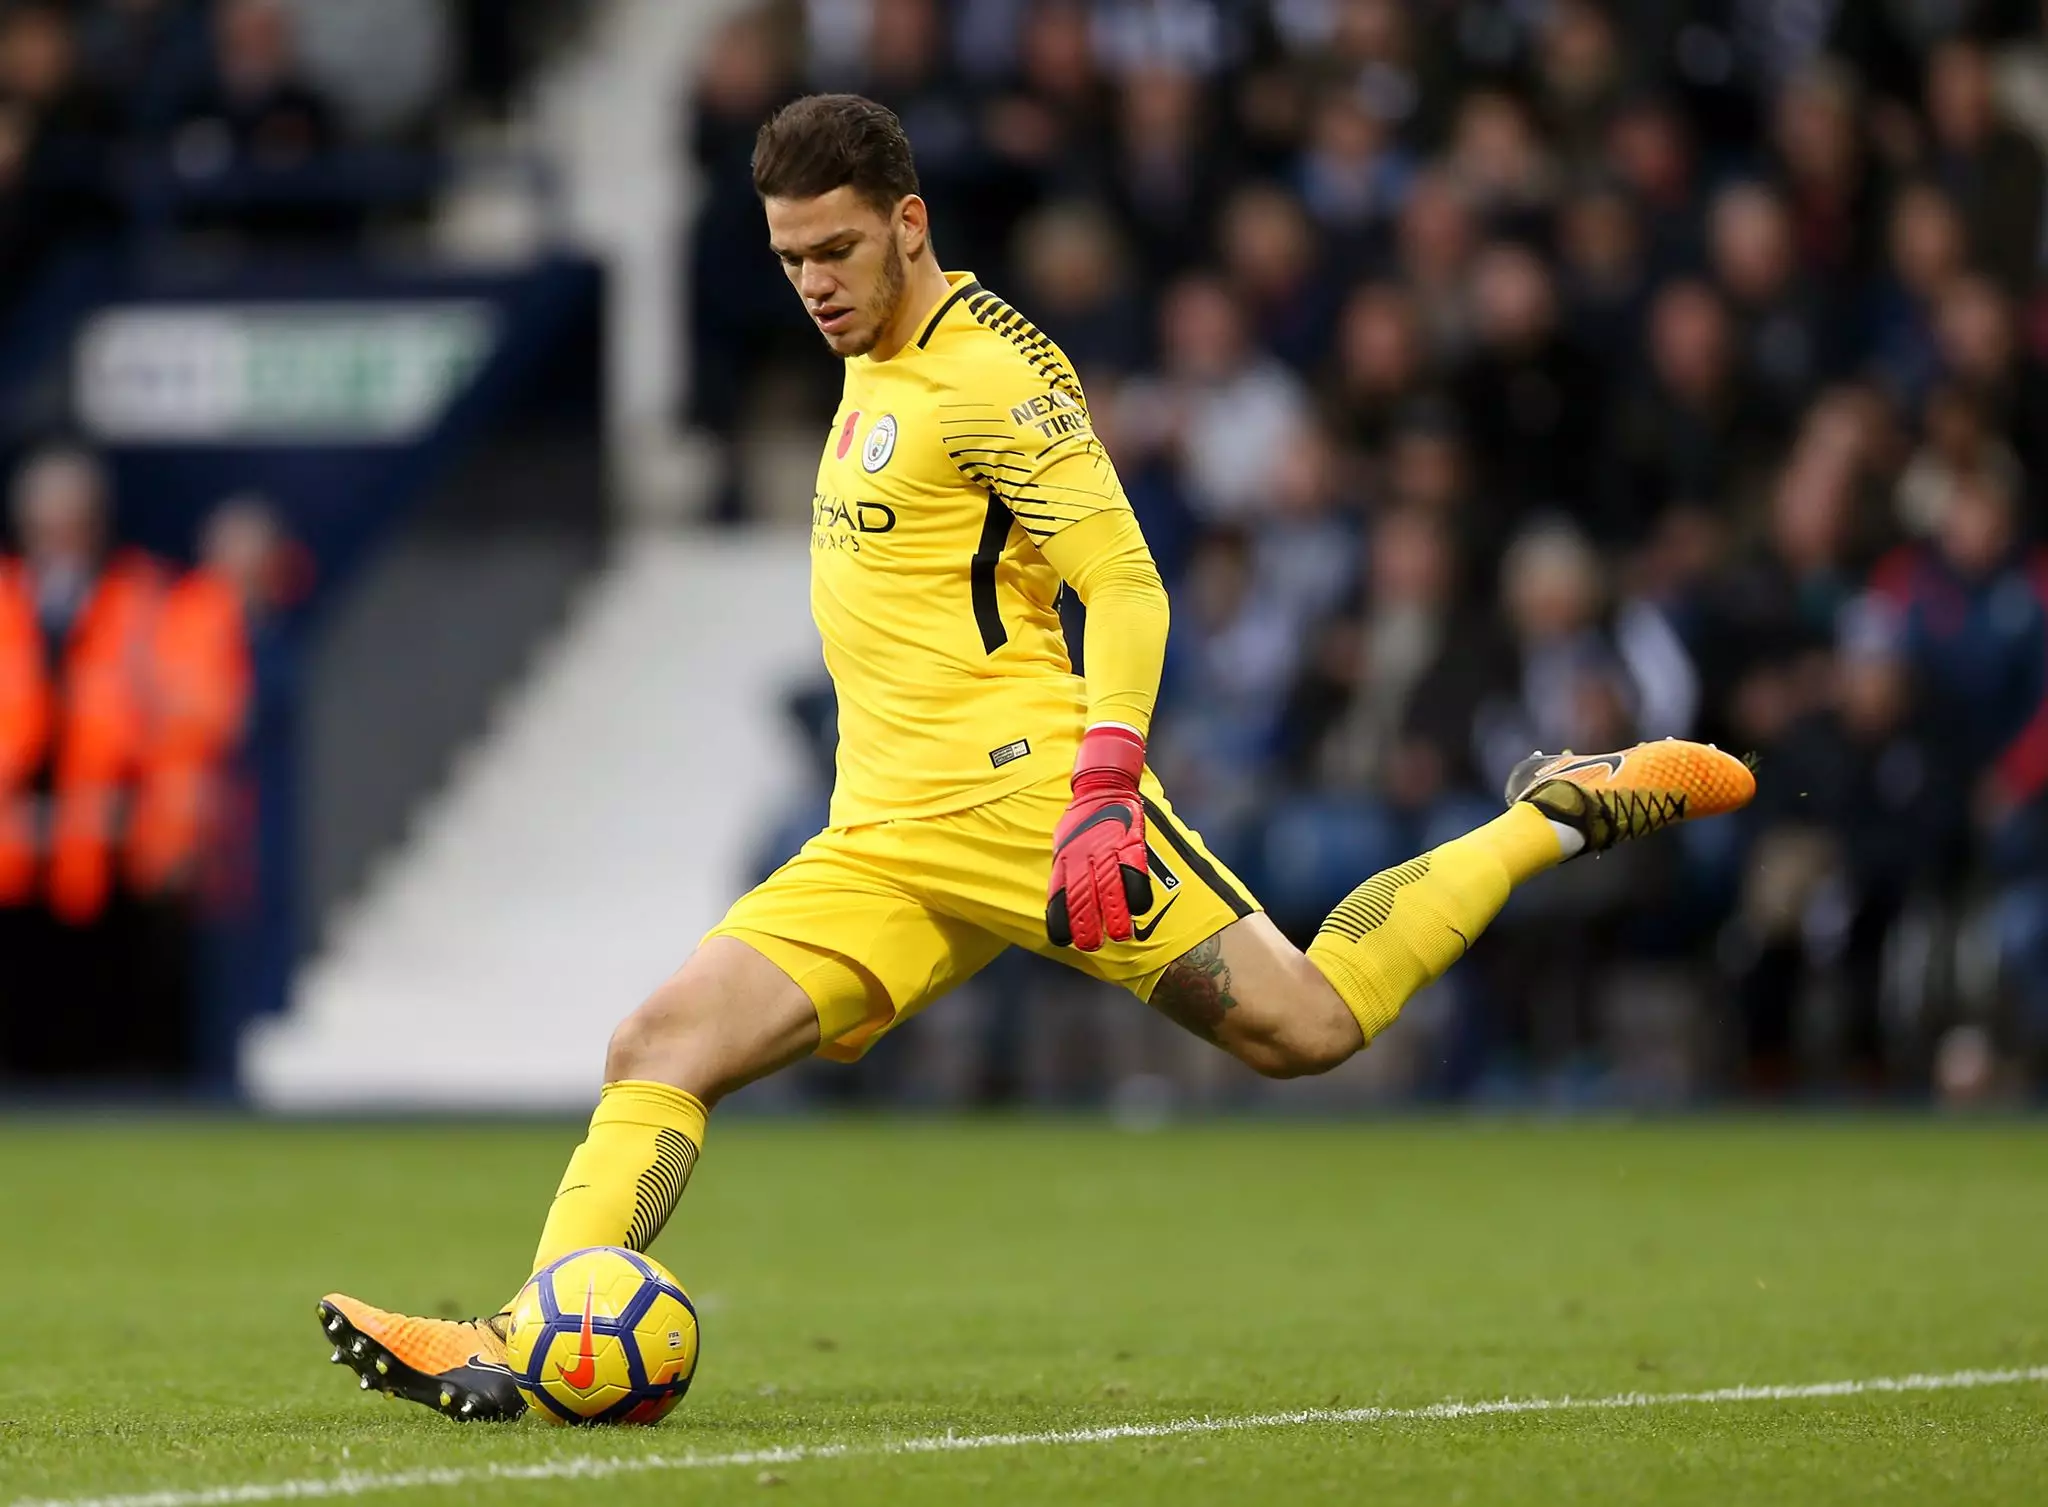 Ederson casually picking out one of his teammates. Image: PA